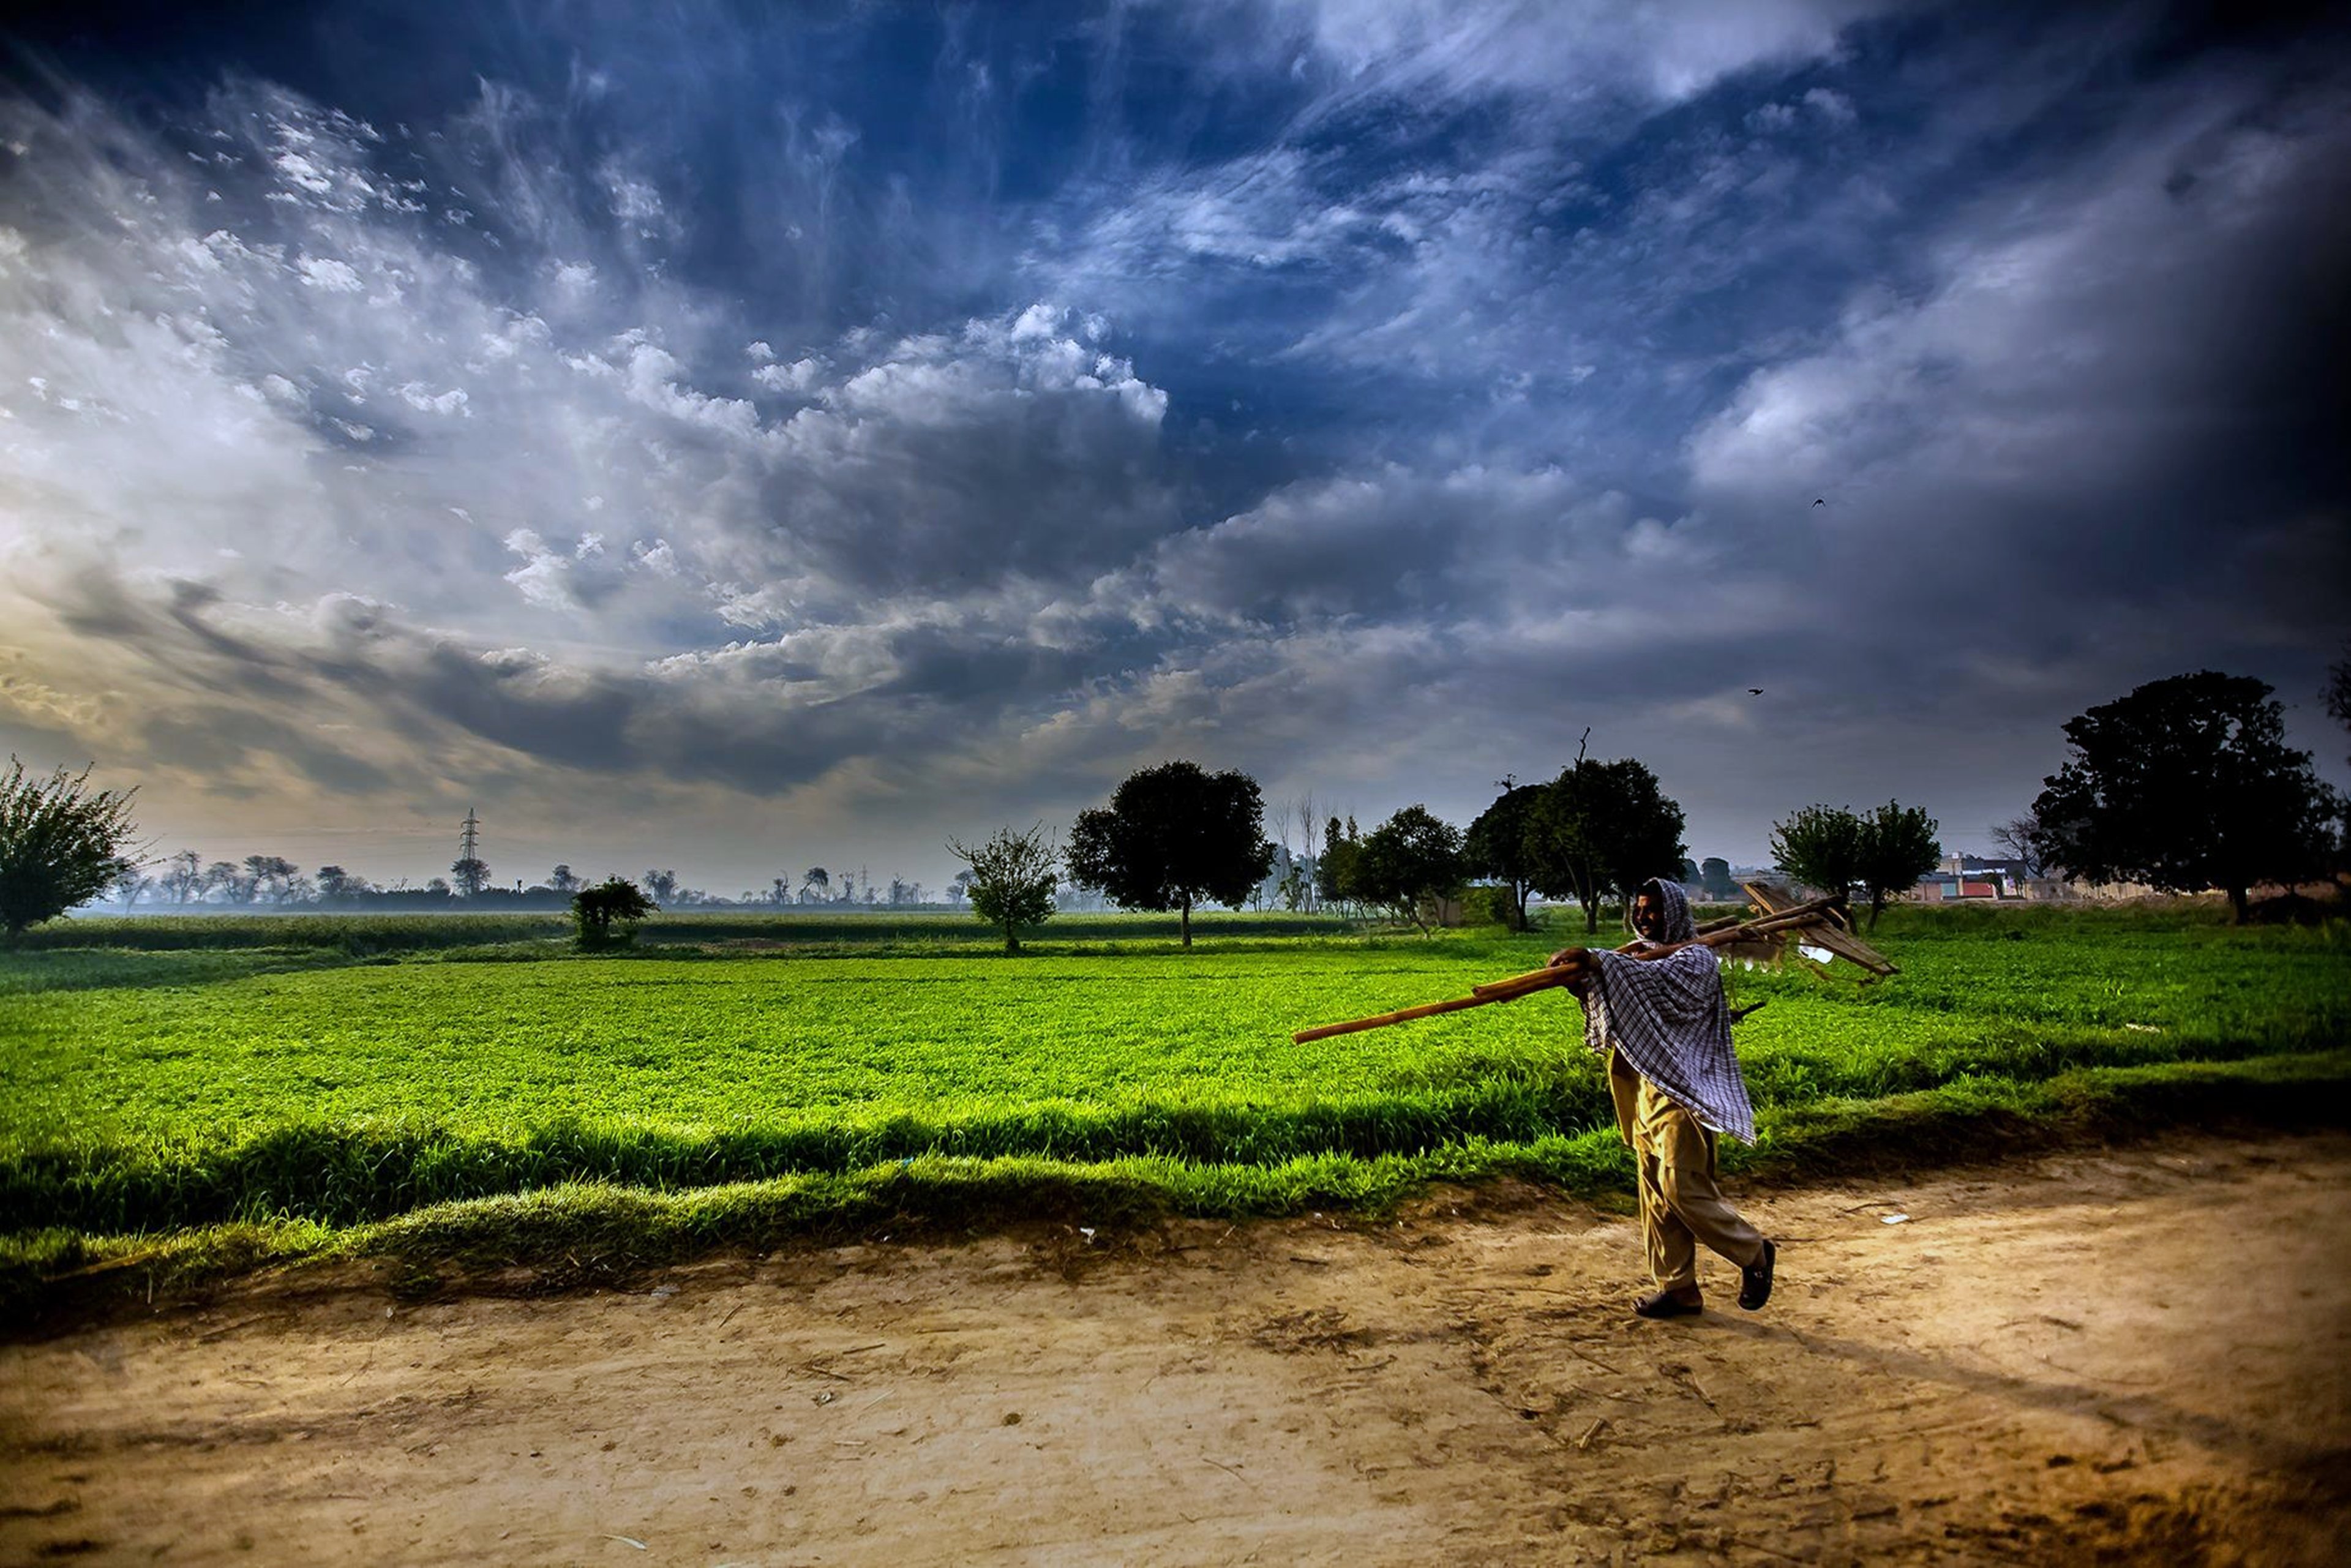 pakistan, Landscapes, Man, Farmer, Agriculture, Clouds, Sky, Trees, Fog, Nature, Countryside, Grass Wallpaper